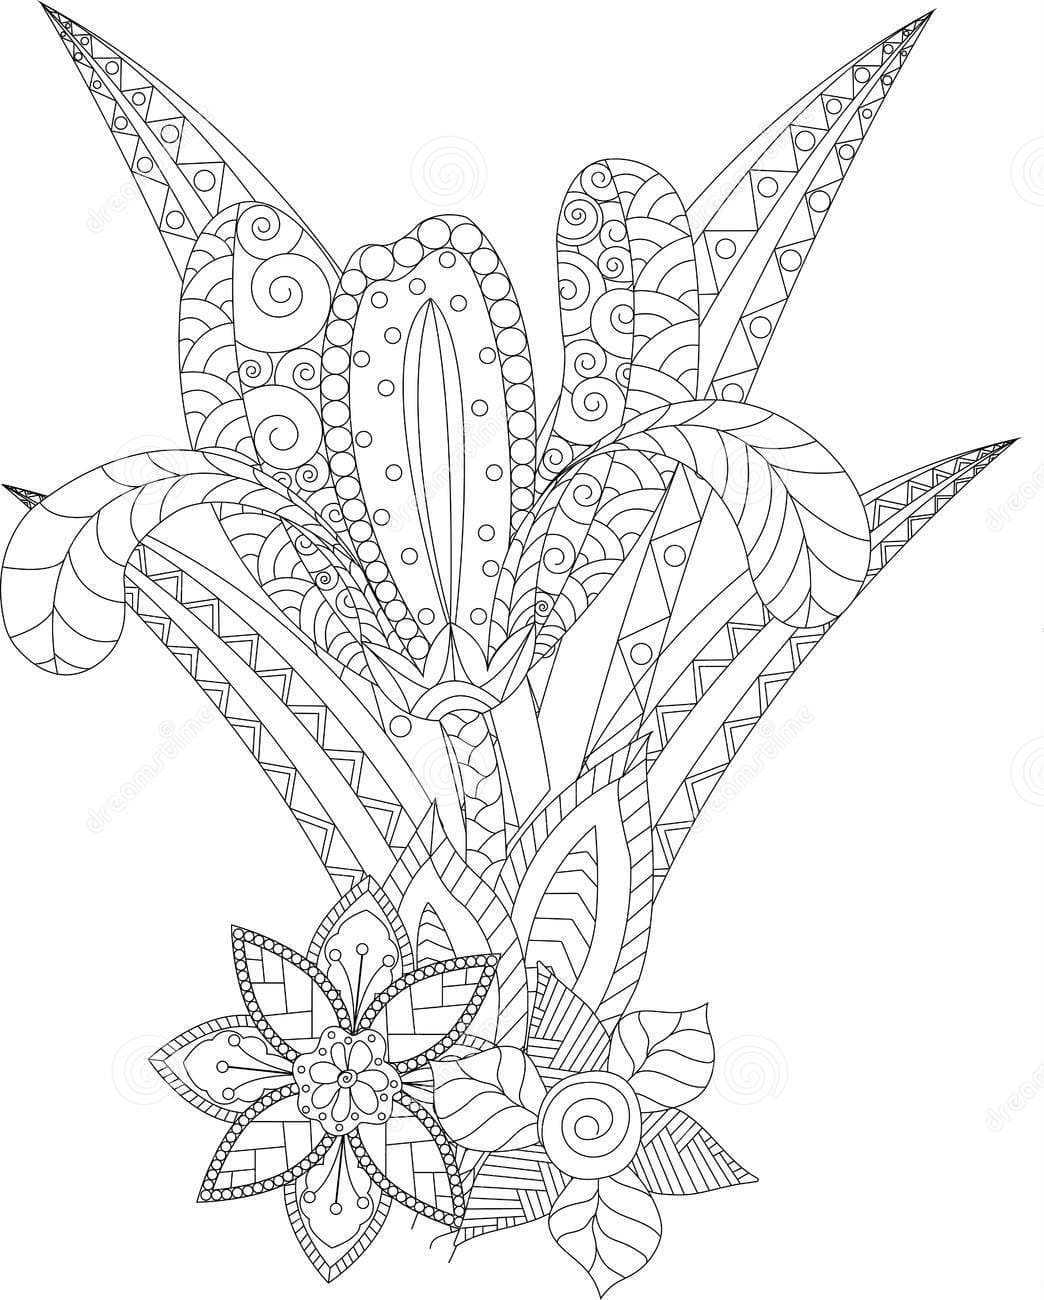 Iris Adult Image Coloring Page